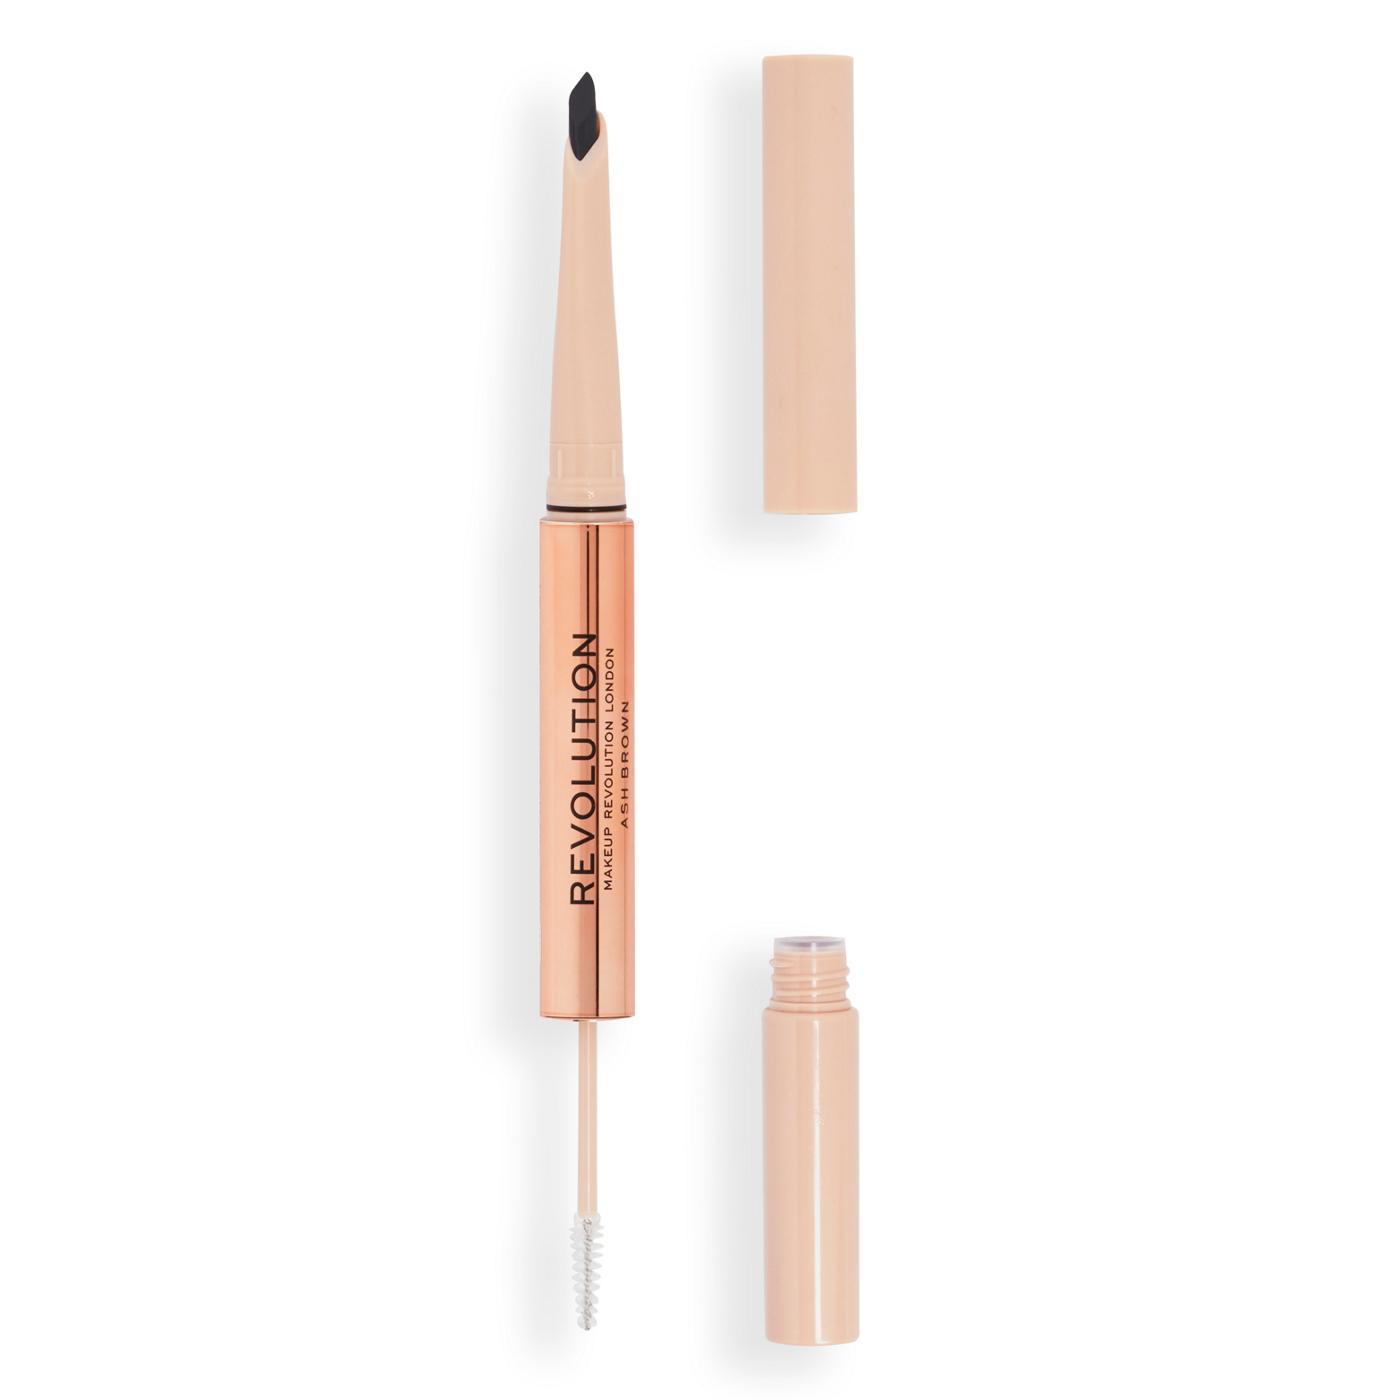 Makeup Revolution Fluffy Brow Duo Pencil - Ash Brown; image 2 of 4